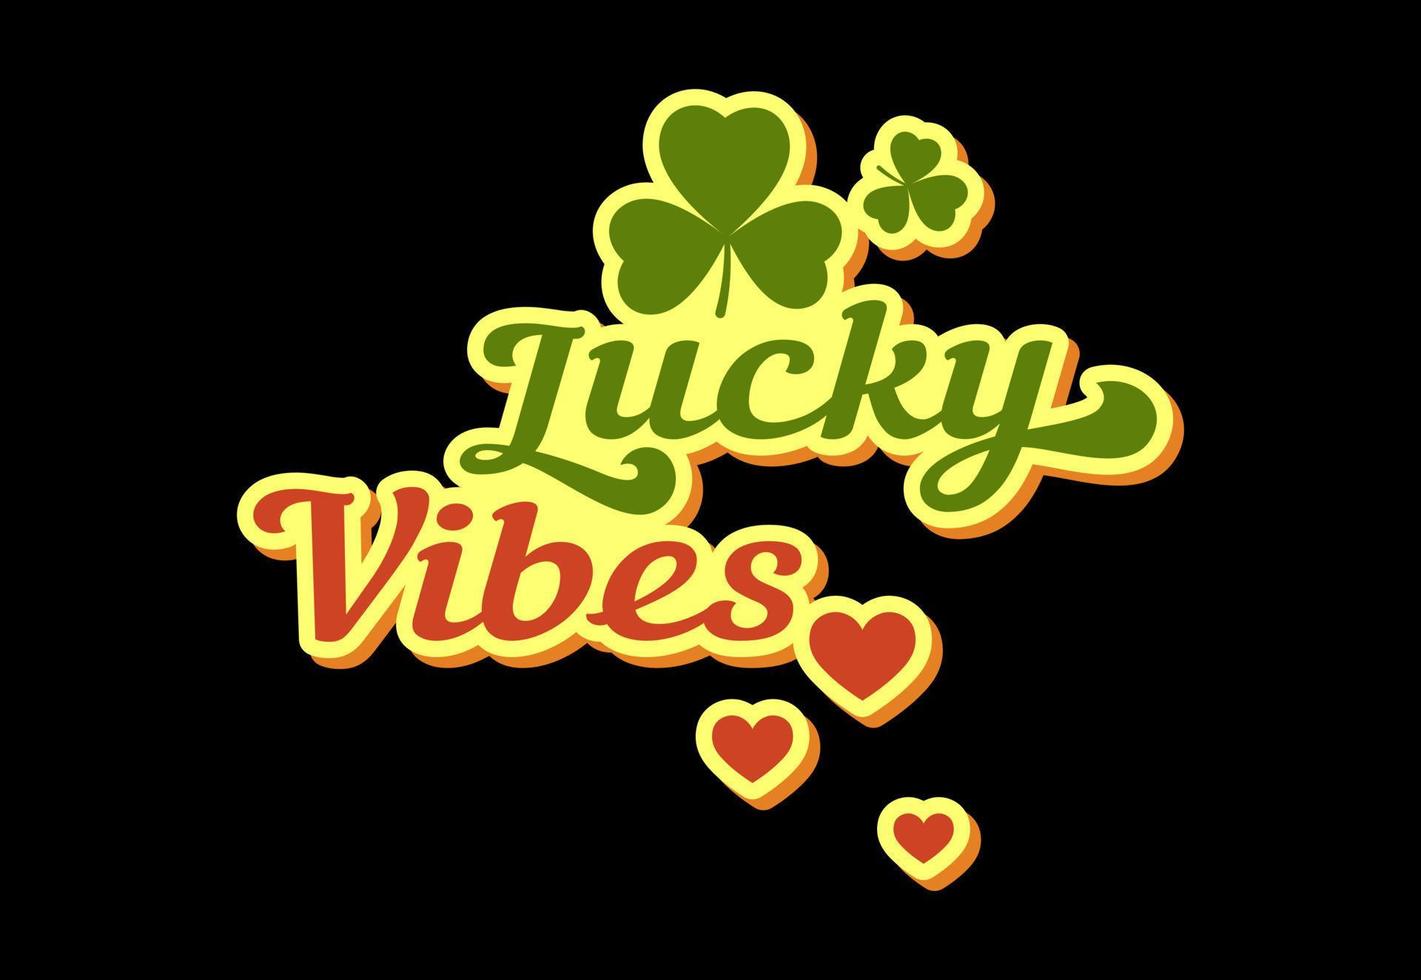 St. Patrick's Day Lettering. Lucky Vibes. vector